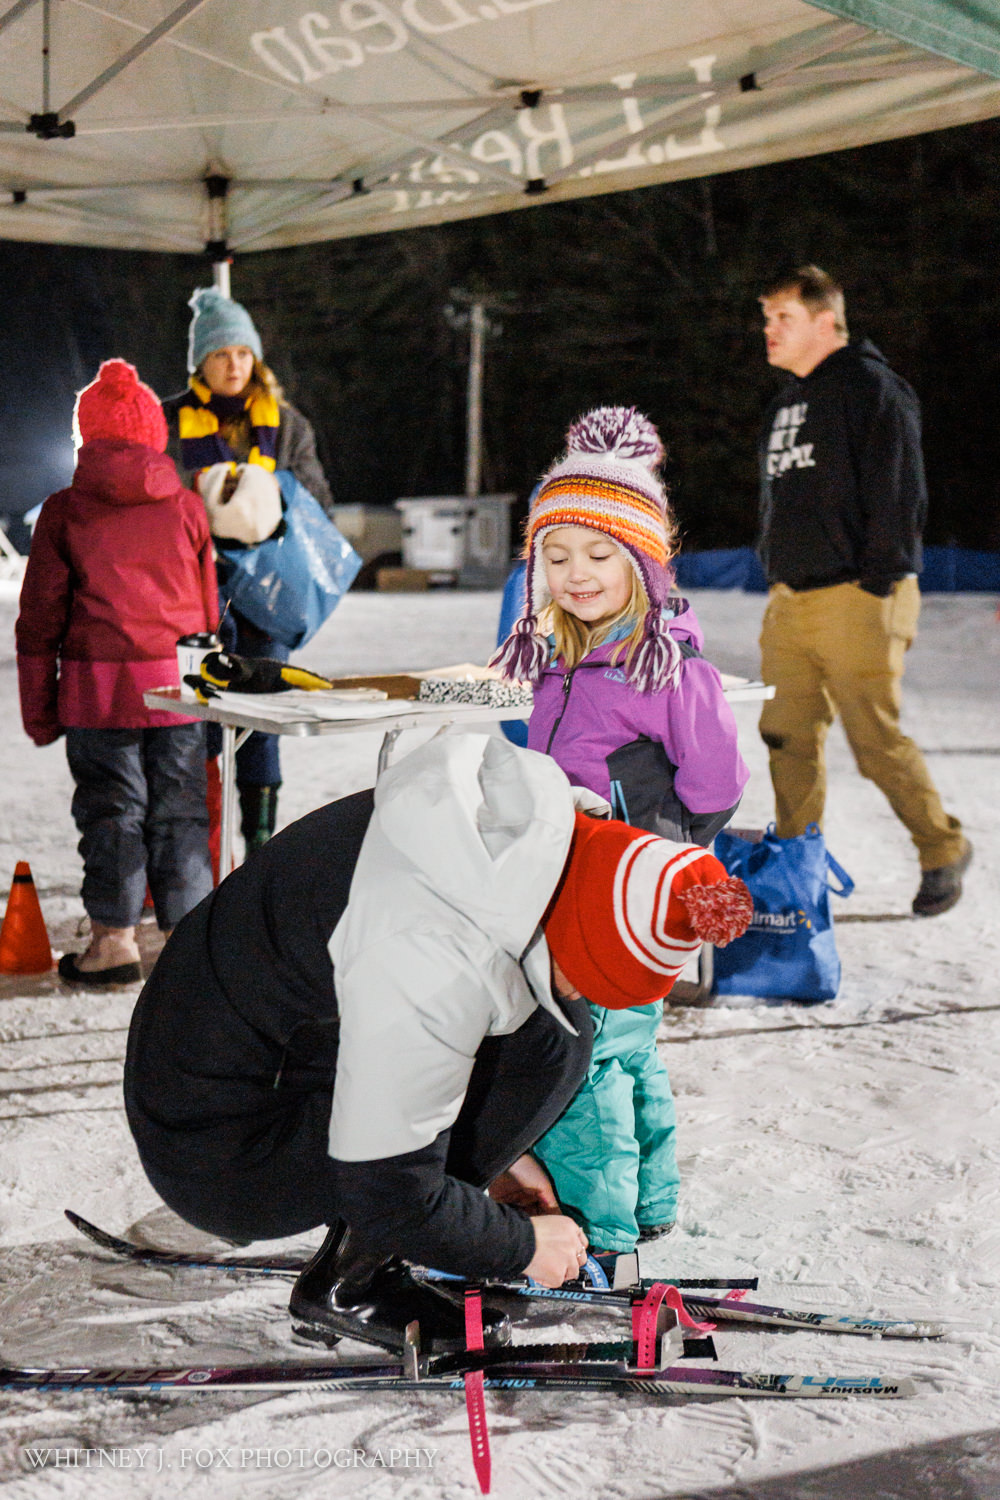 492 winter kids welcome to winter 2022 lost valley auburn maine documentary event photographer whitney j fox 3327 w